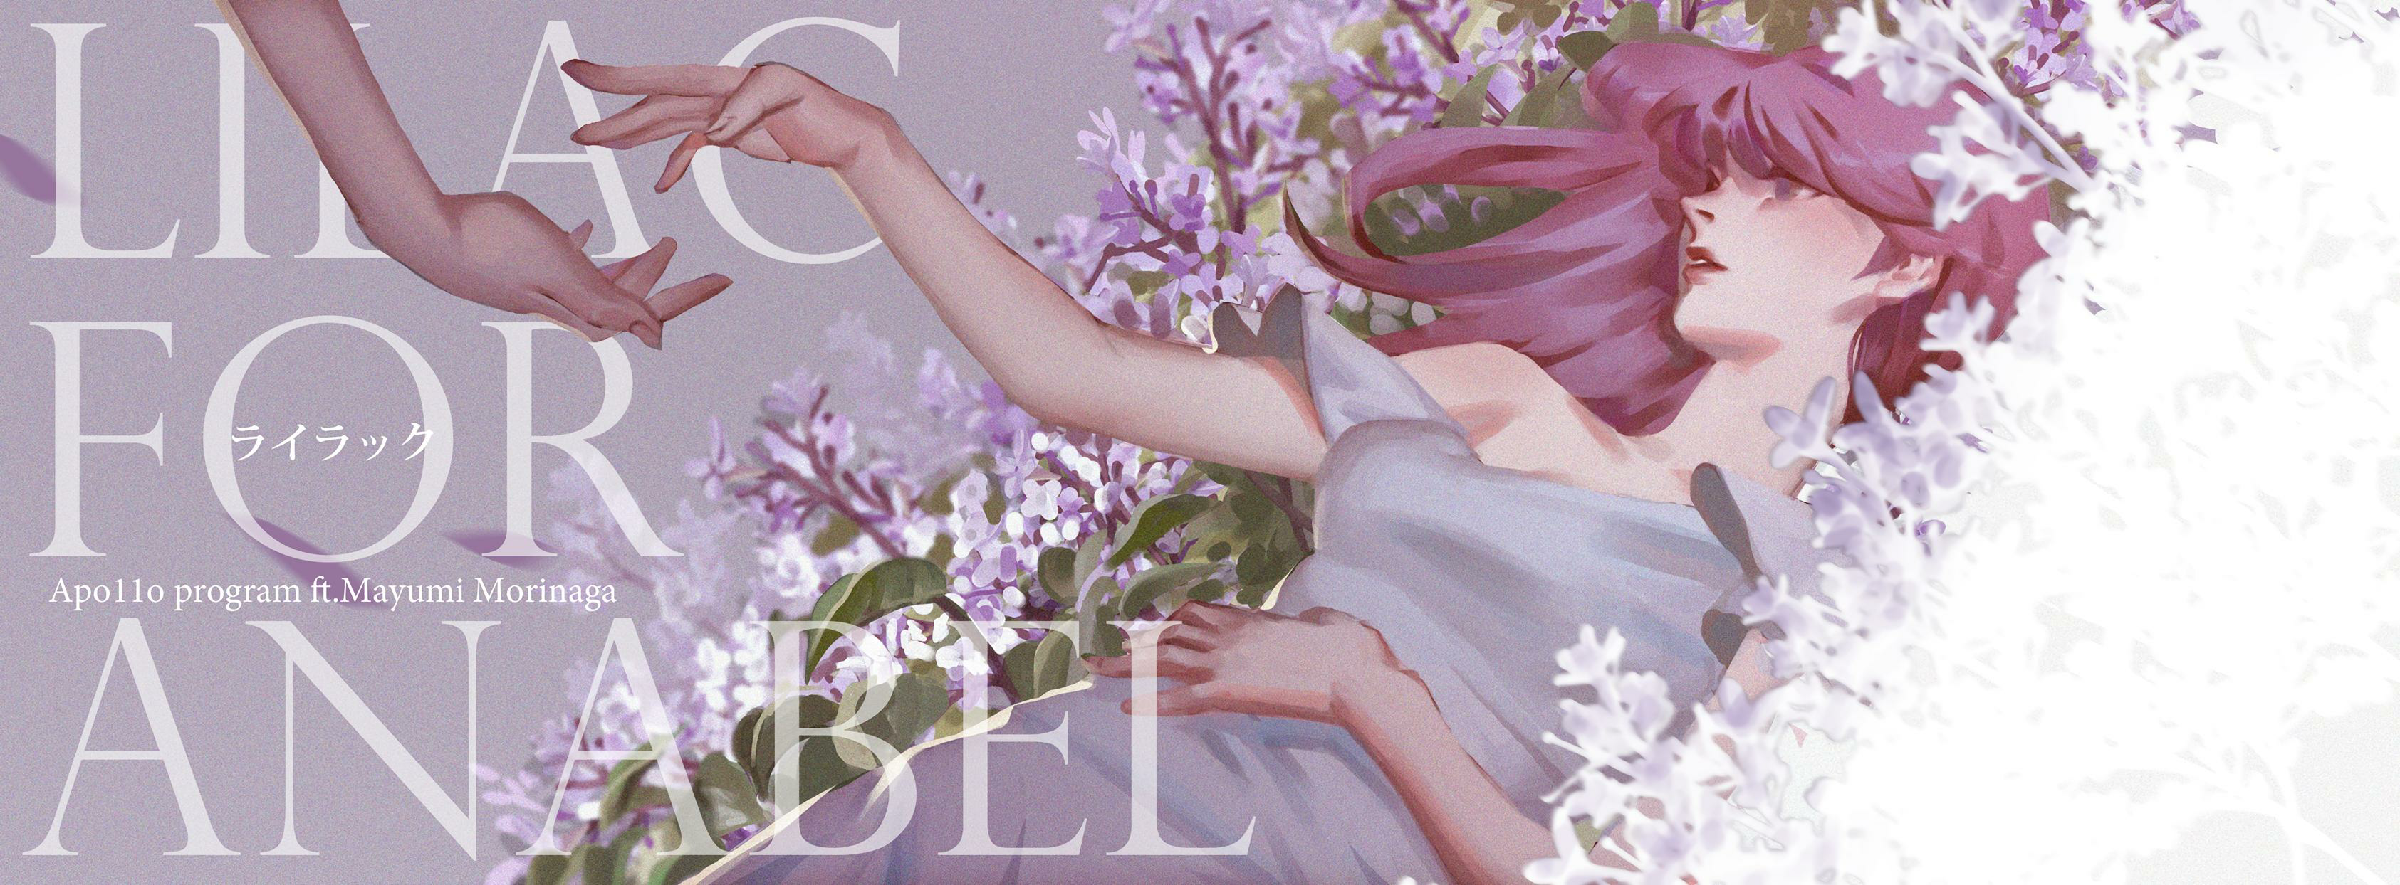 Lilac for Anabel.png